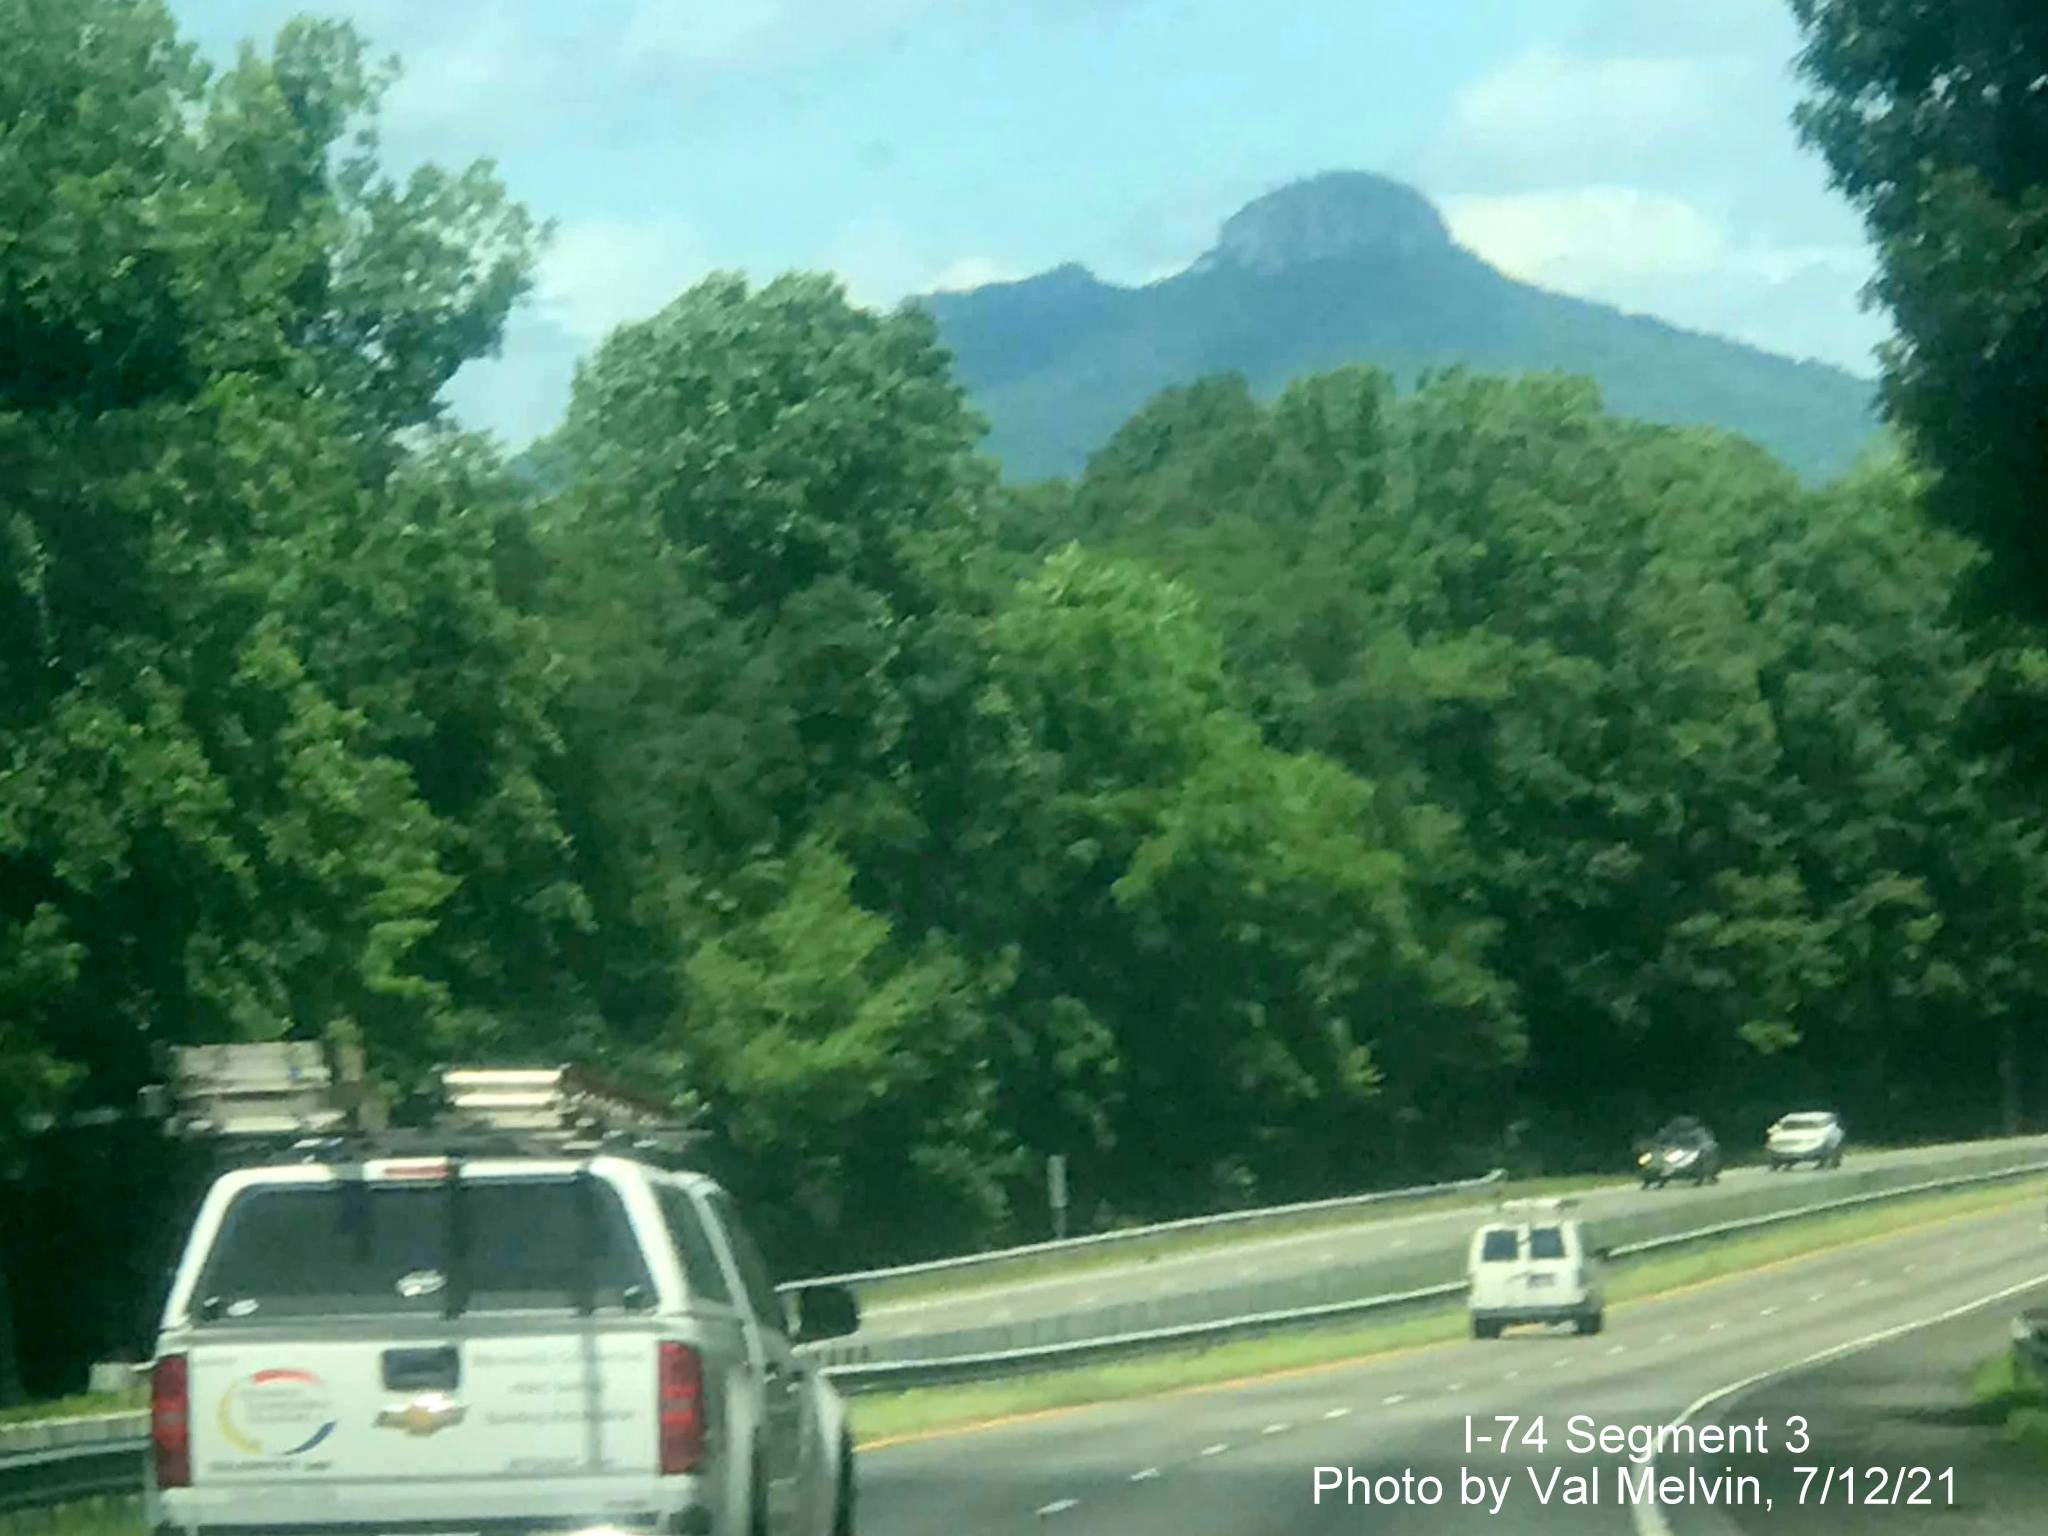 Image of Pilot Mountain as seen from US 52 North (Future I-74 West) in Stokes County, by Val Melvin, July 2021